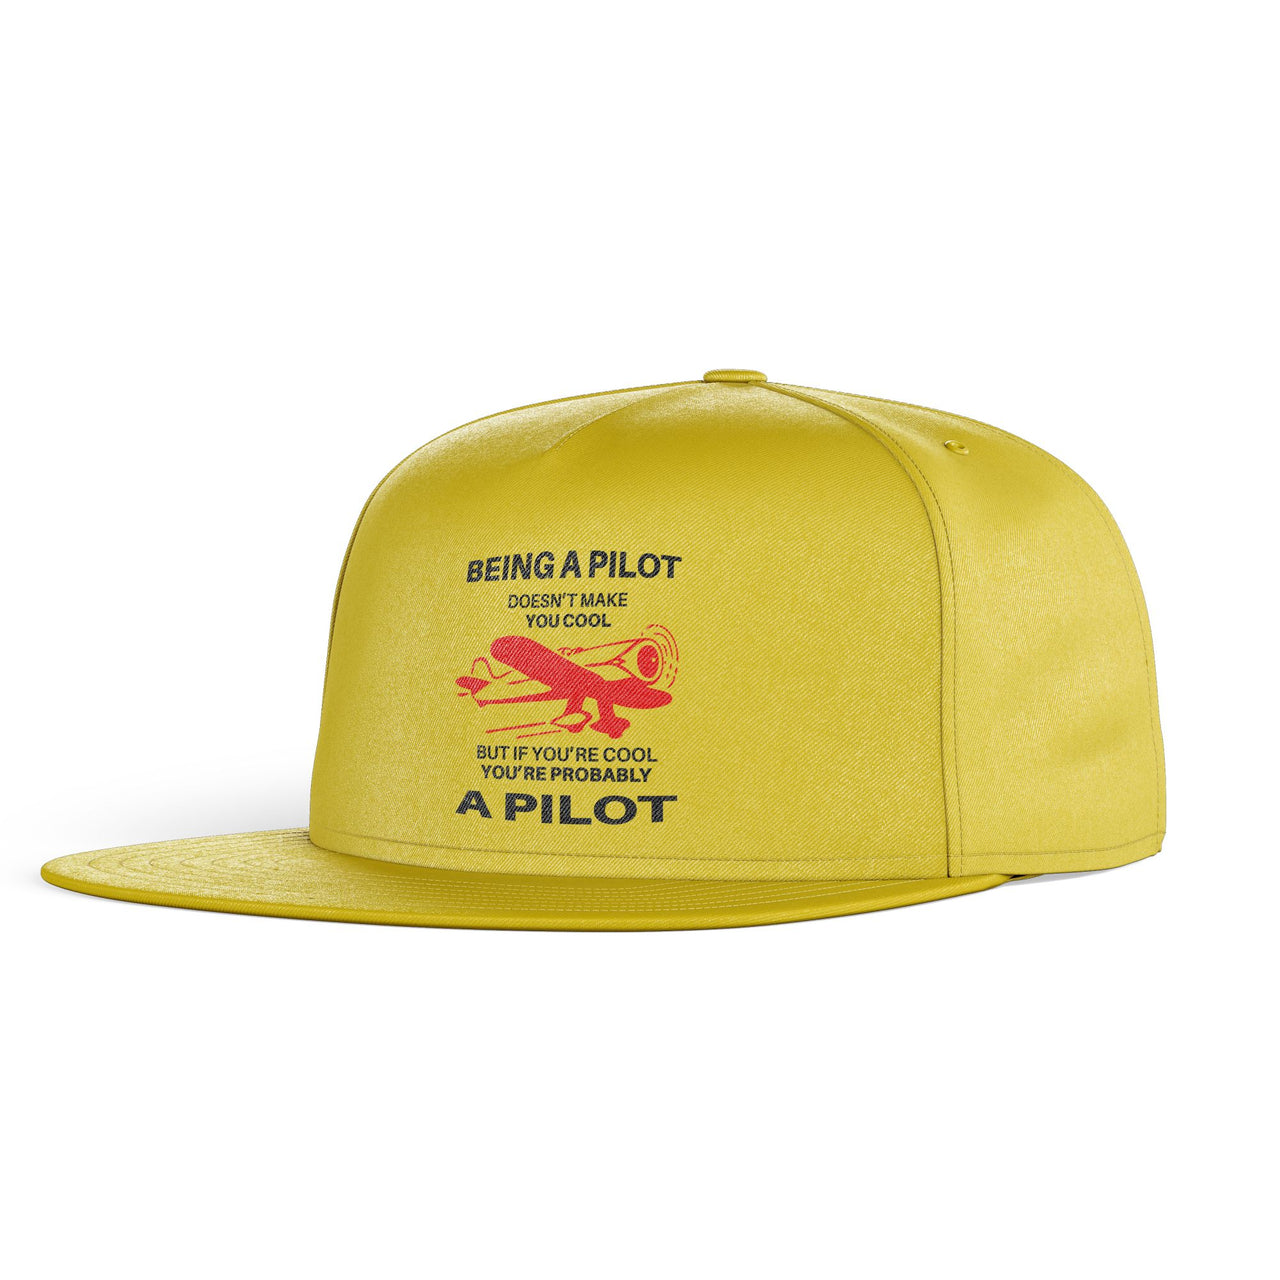 If You're Cool You're Probably a Pilot Designed Snapback Caps & Hats